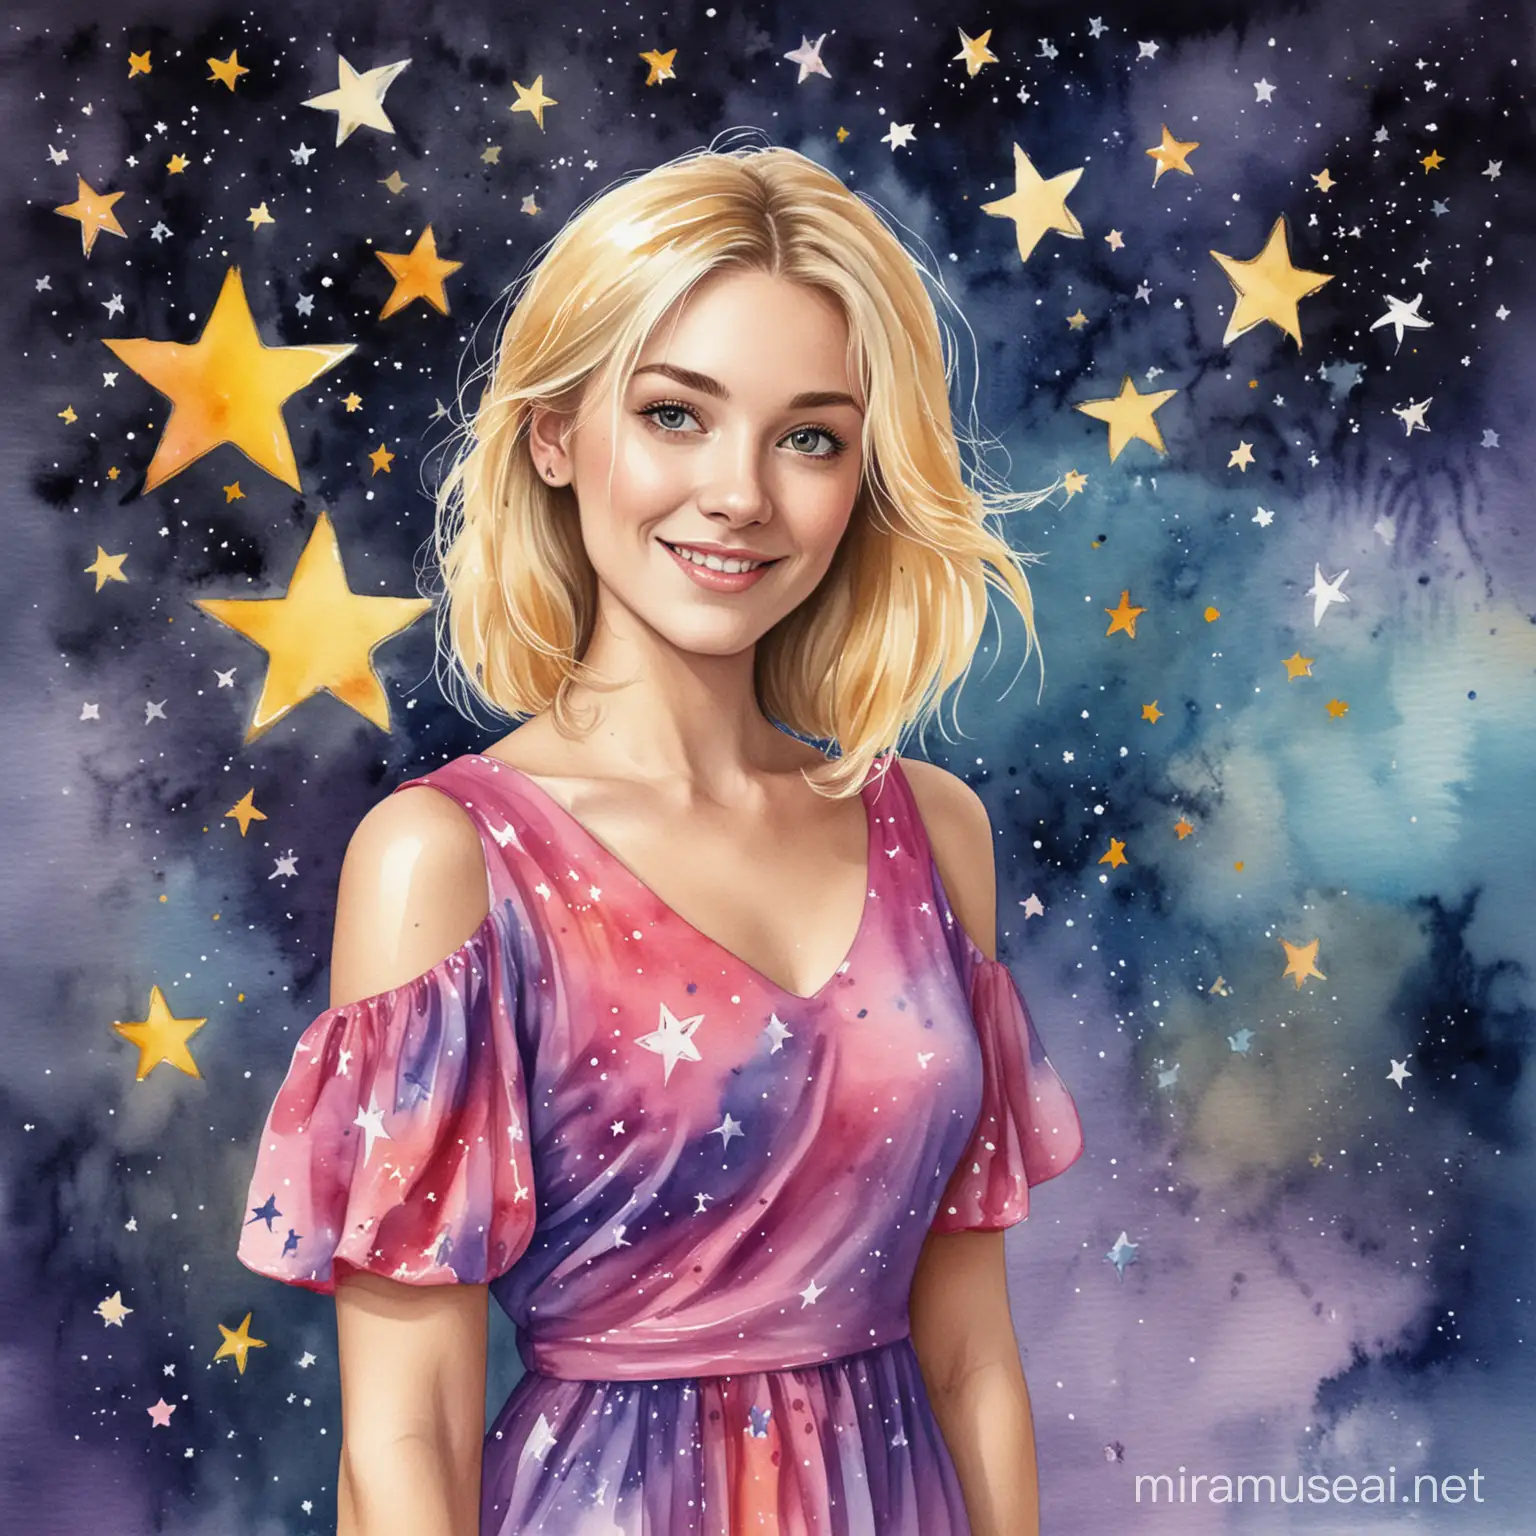 create me a picture as a watercolour artwork of an art teacher who has shoulder length blonde hair and wears colourful dress. The image needs to have a school and stars in the background. There needs to be a banner that says "Rosebank Rockstar" she should have a paintbrush in her hand.  whimsical